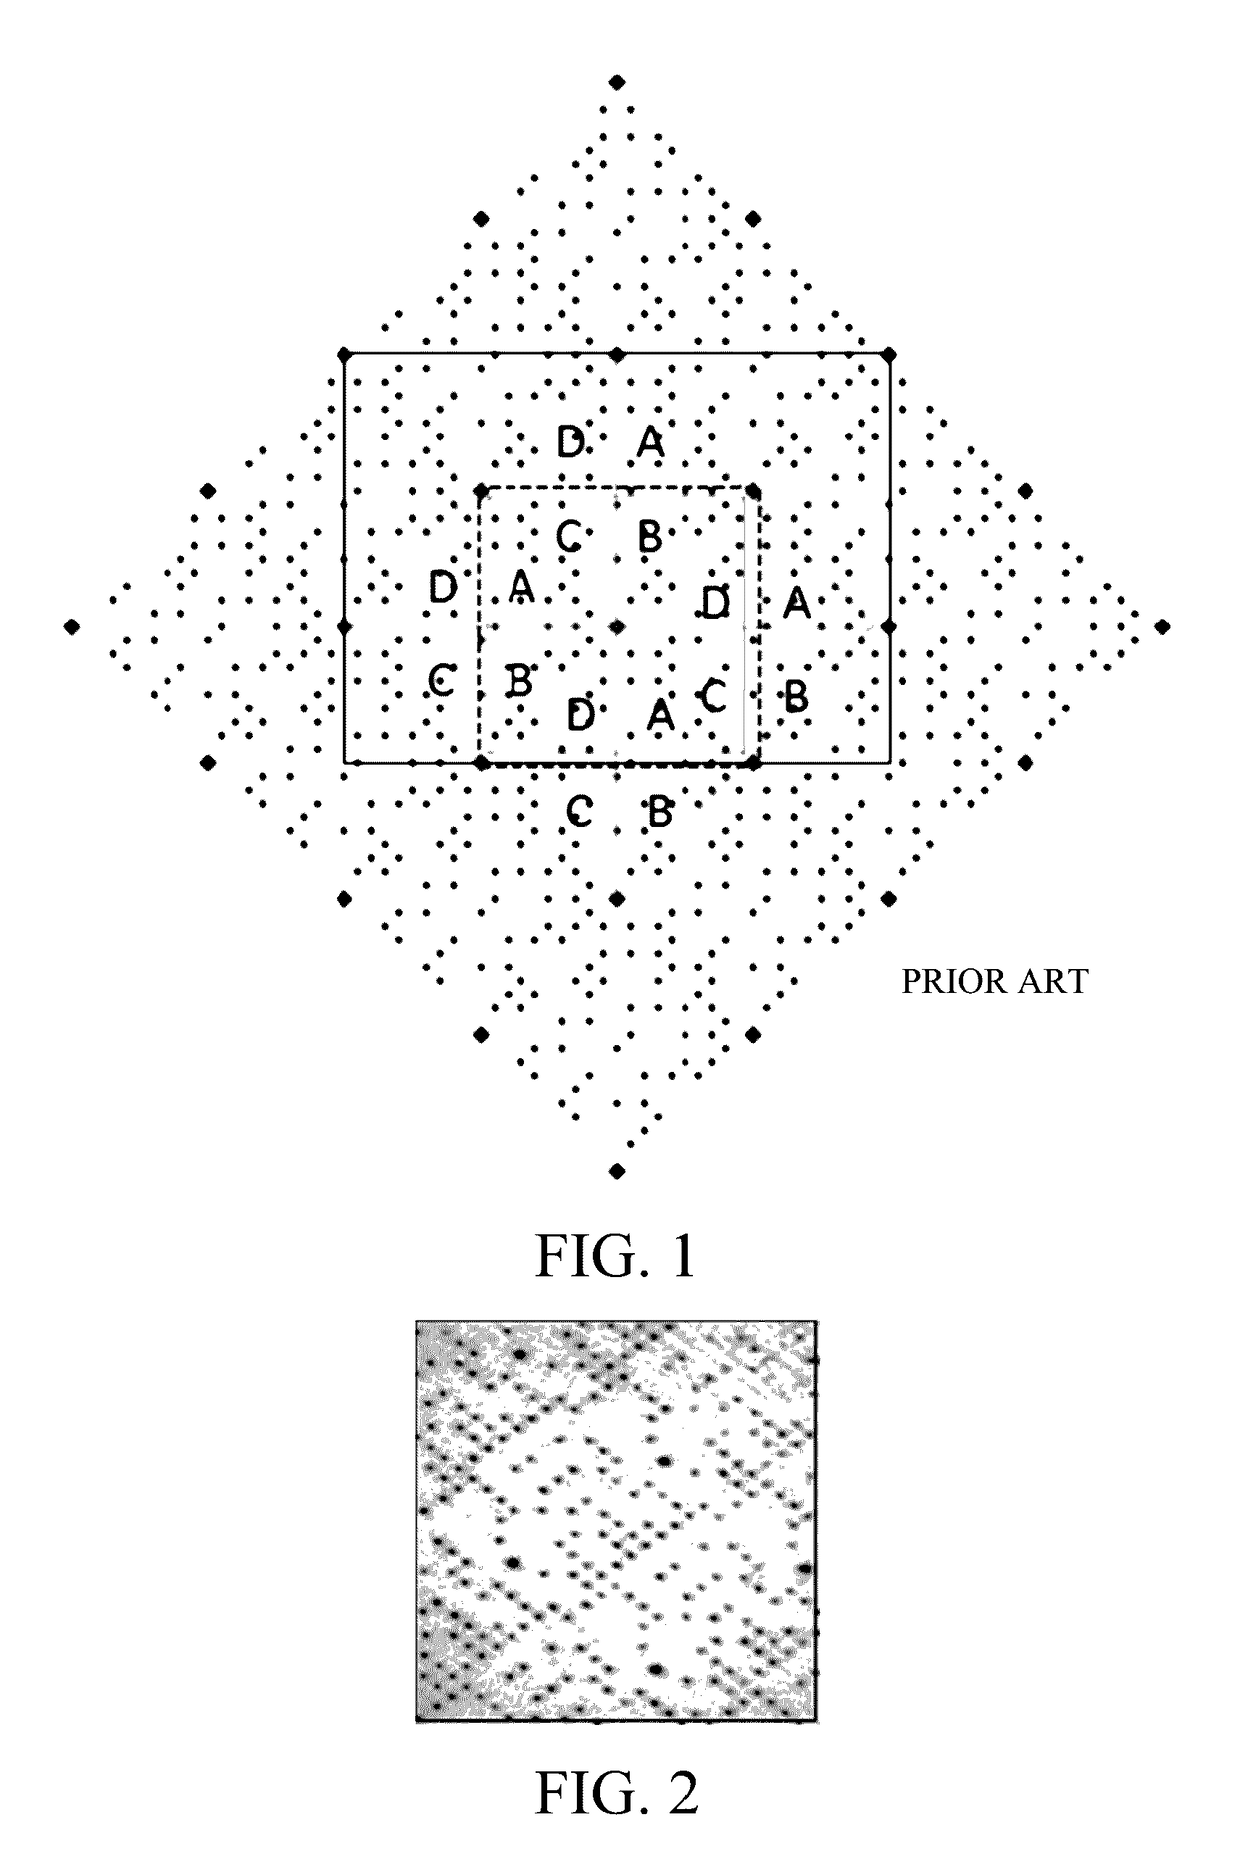 Decoding method for matrix two-dimensional code